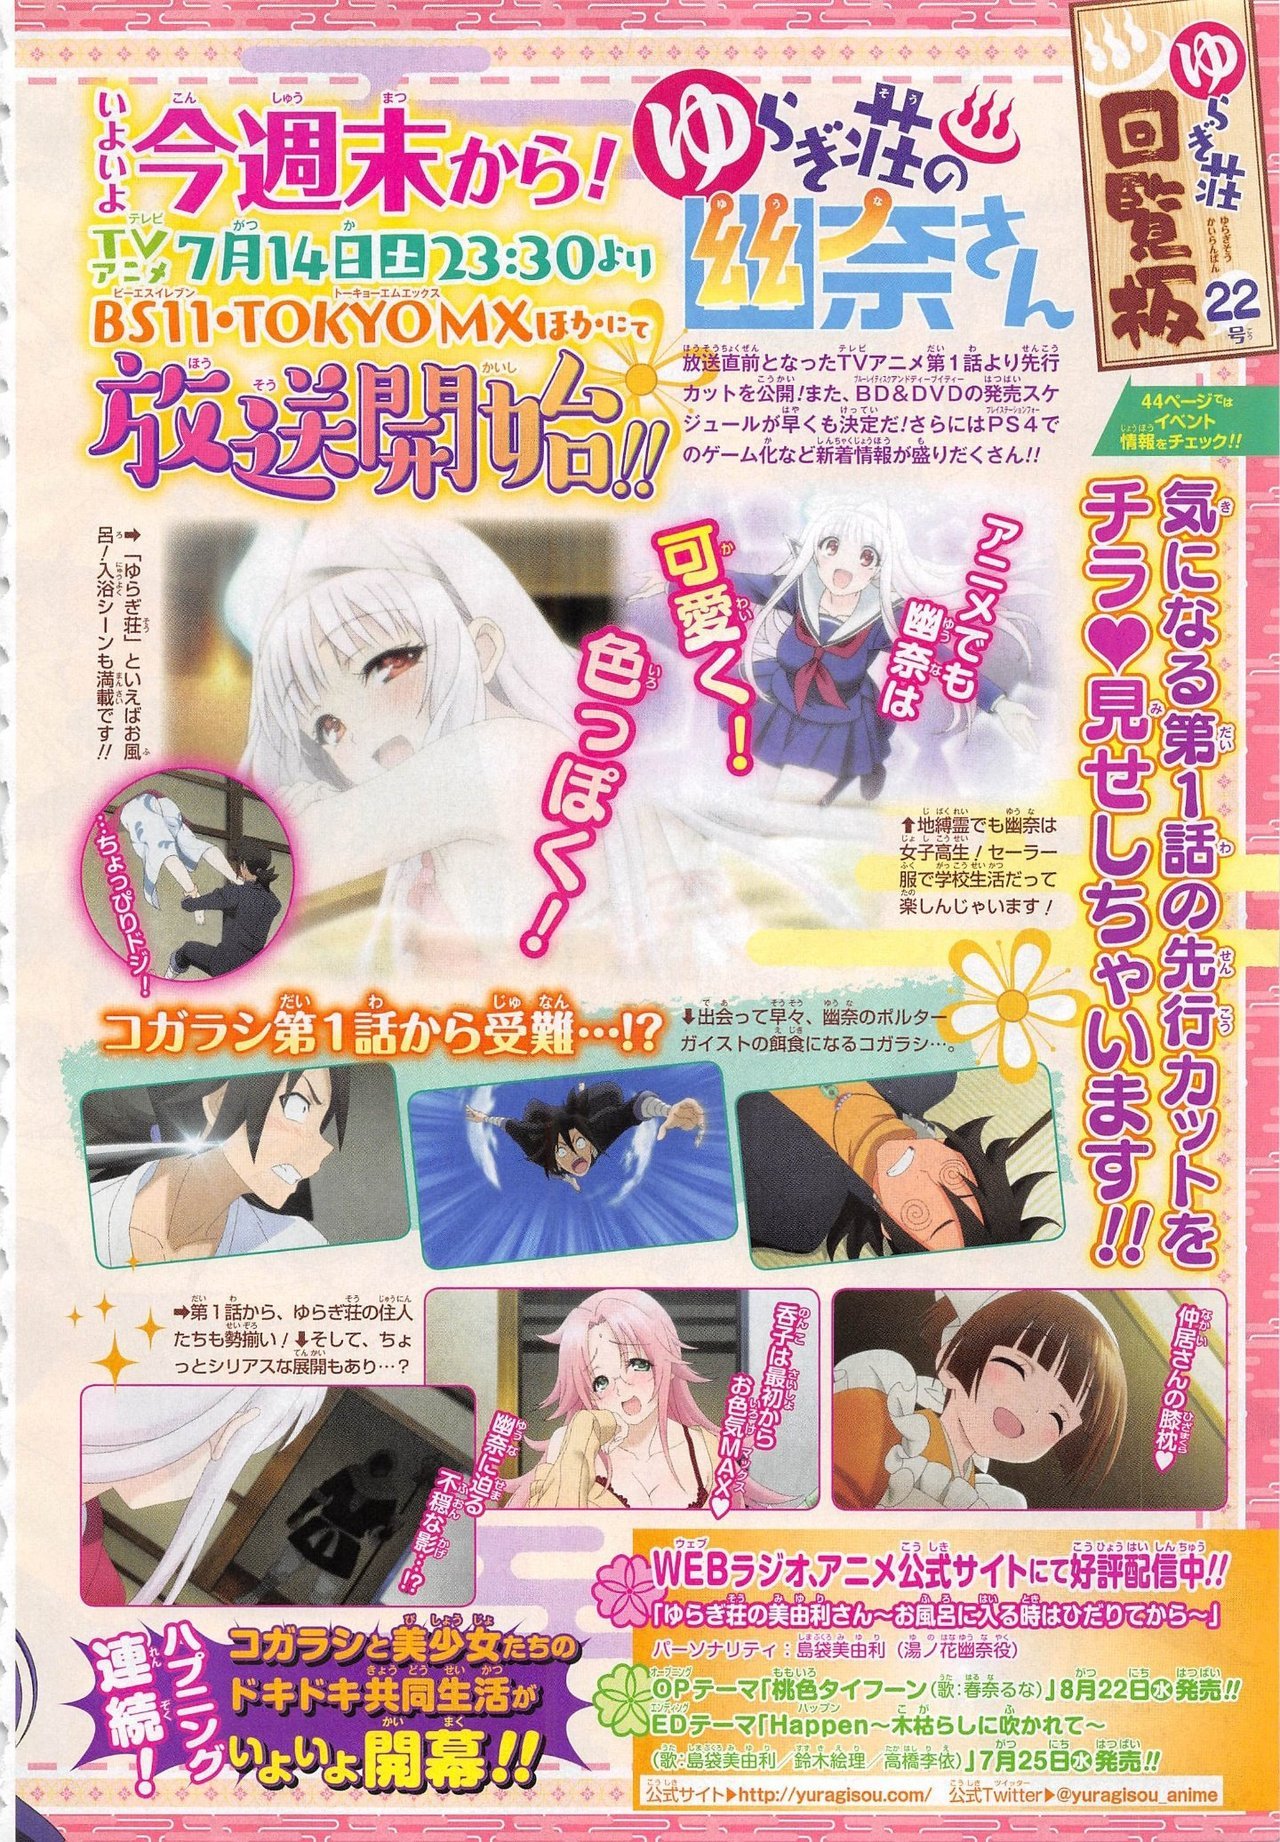 Scan for âYuragi-sou no Yuuna-sanâ (Yuuna and the Haunted Hot Springs) with episode 1 screencaps. ED theme will also be performed by Yuuna VA Miyuri Shimabukuro. Broadcast begins July 14th (Xebec)